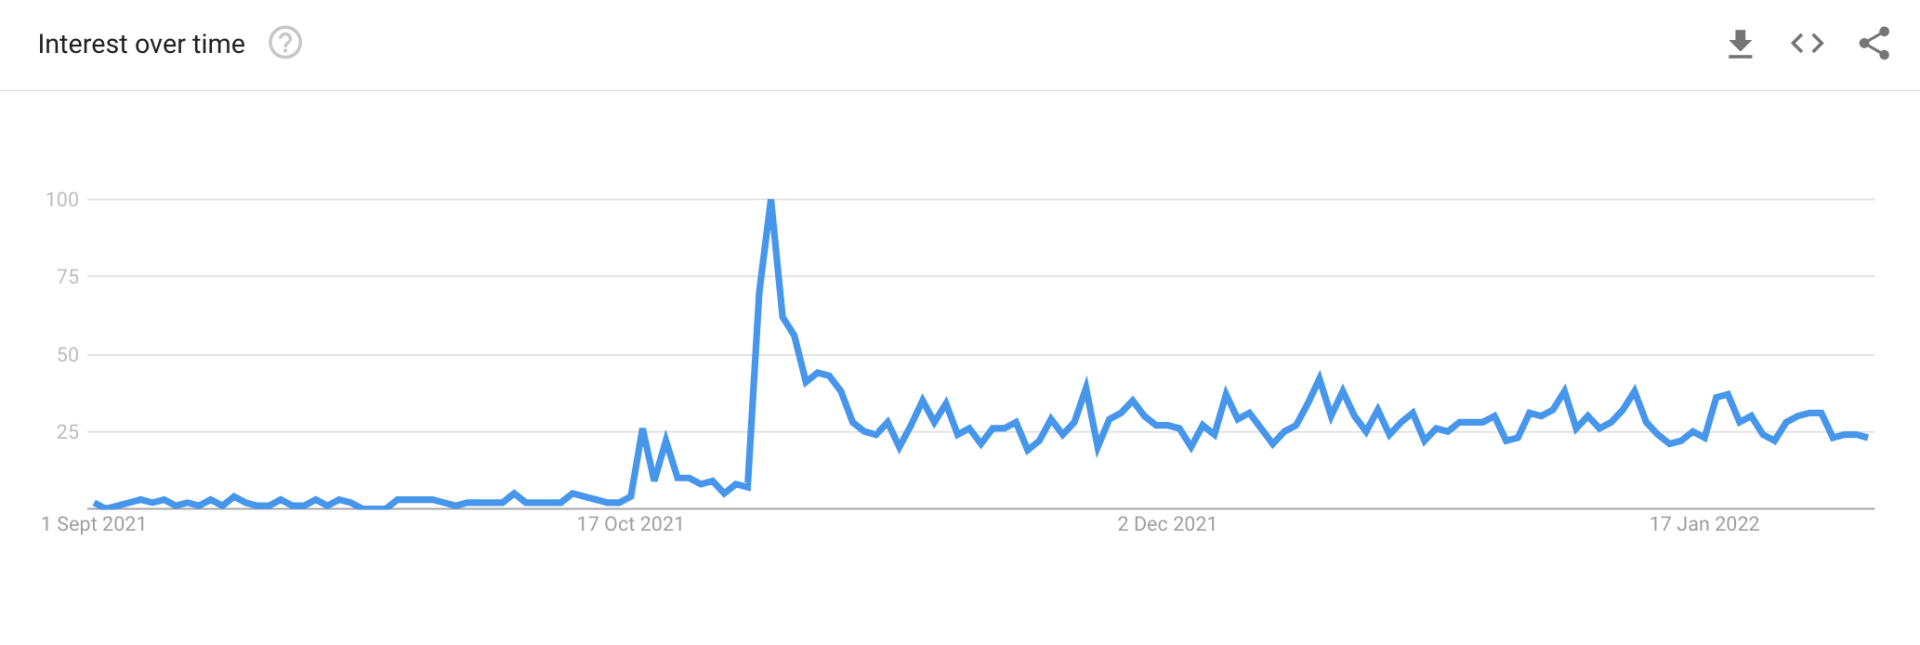 Google Trends data - Sep 21 and Jan 22